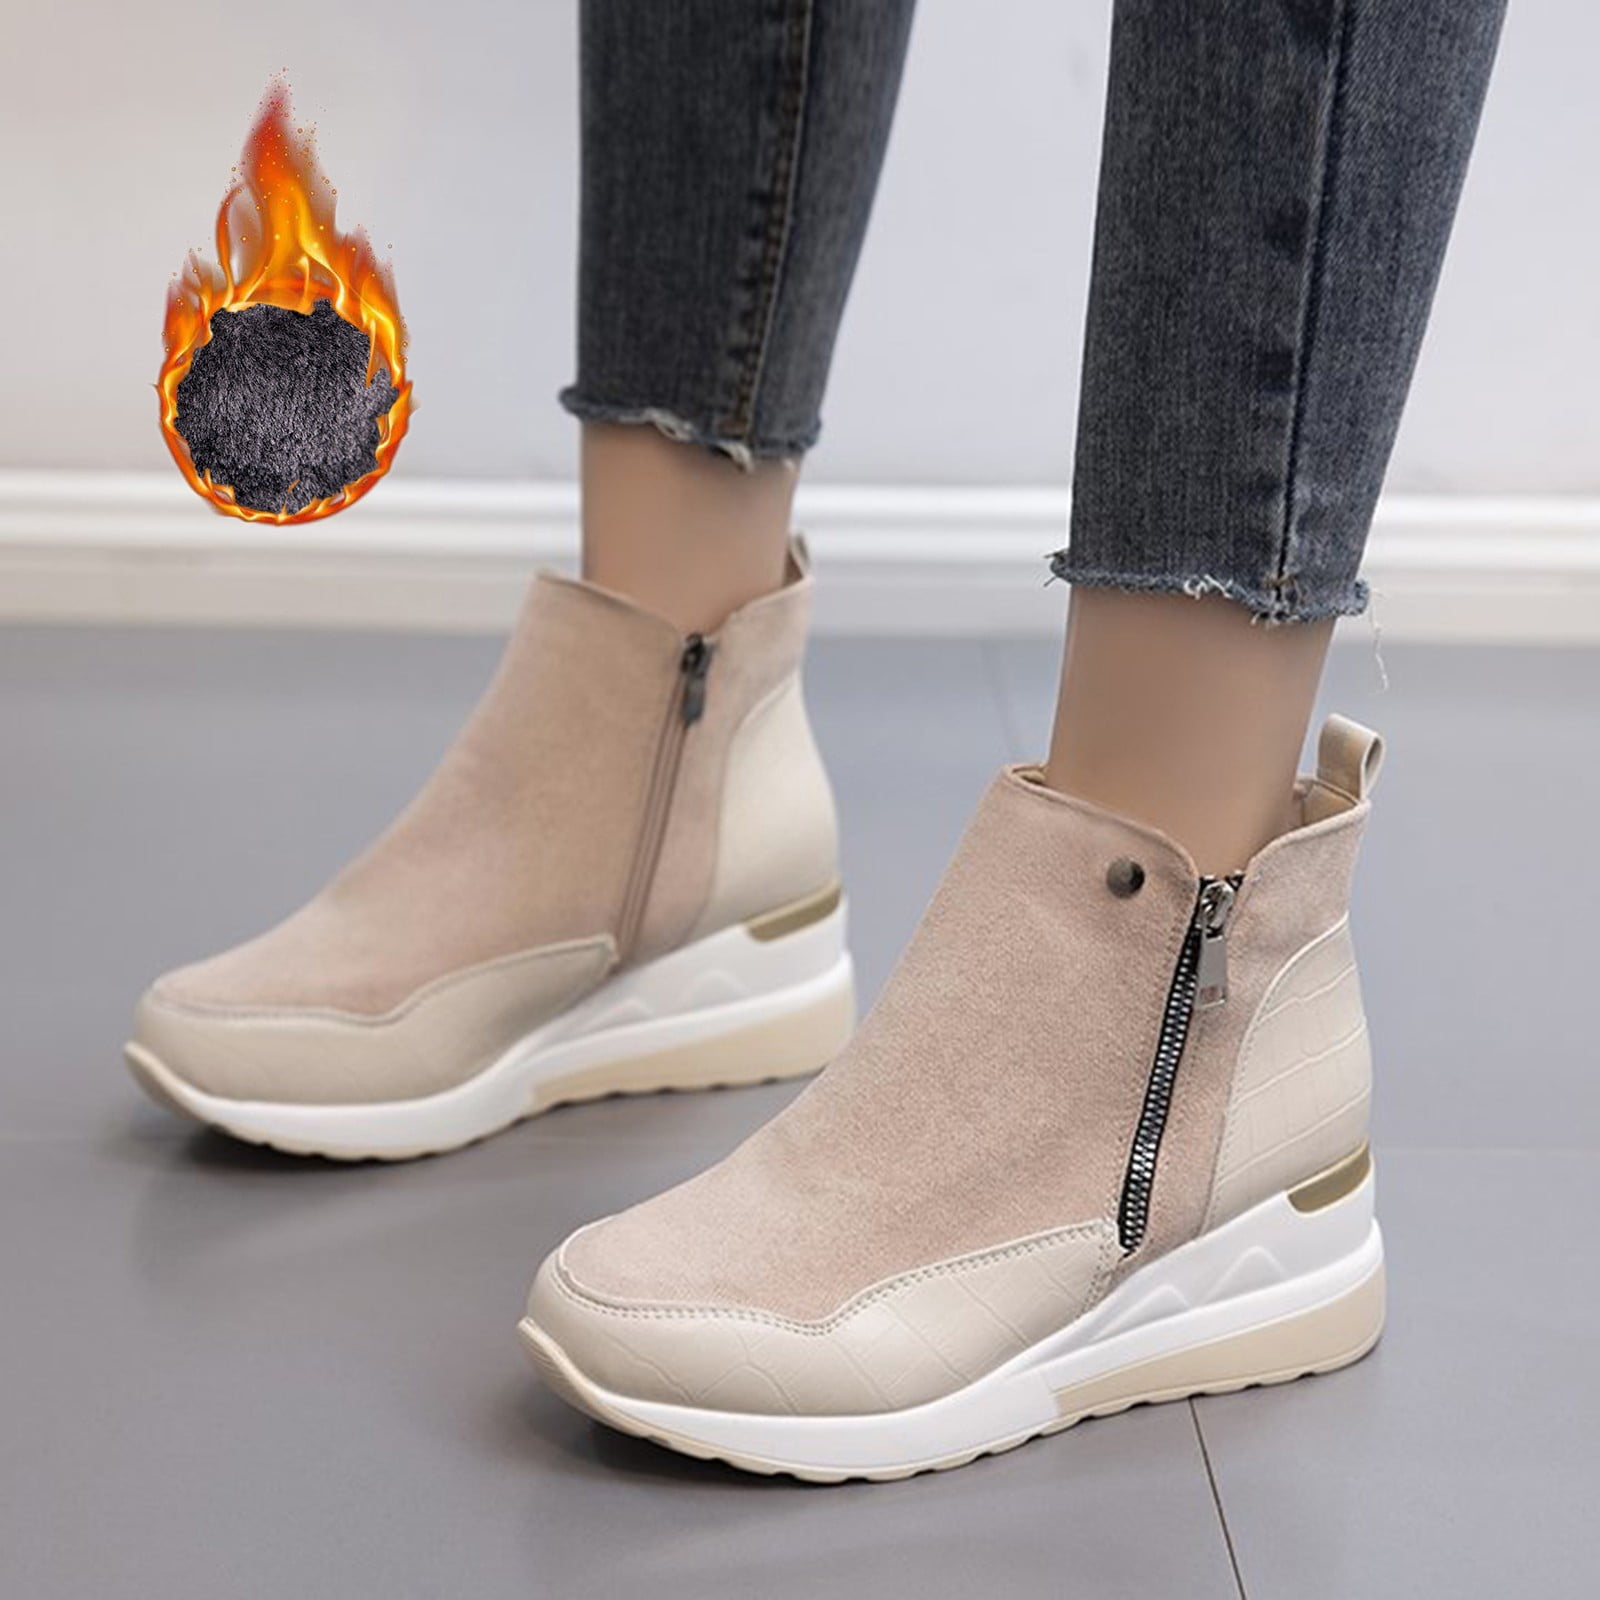 Wefuesd Casual Boots Boots Wedges Women's Sneakers Short Short Shoes ...